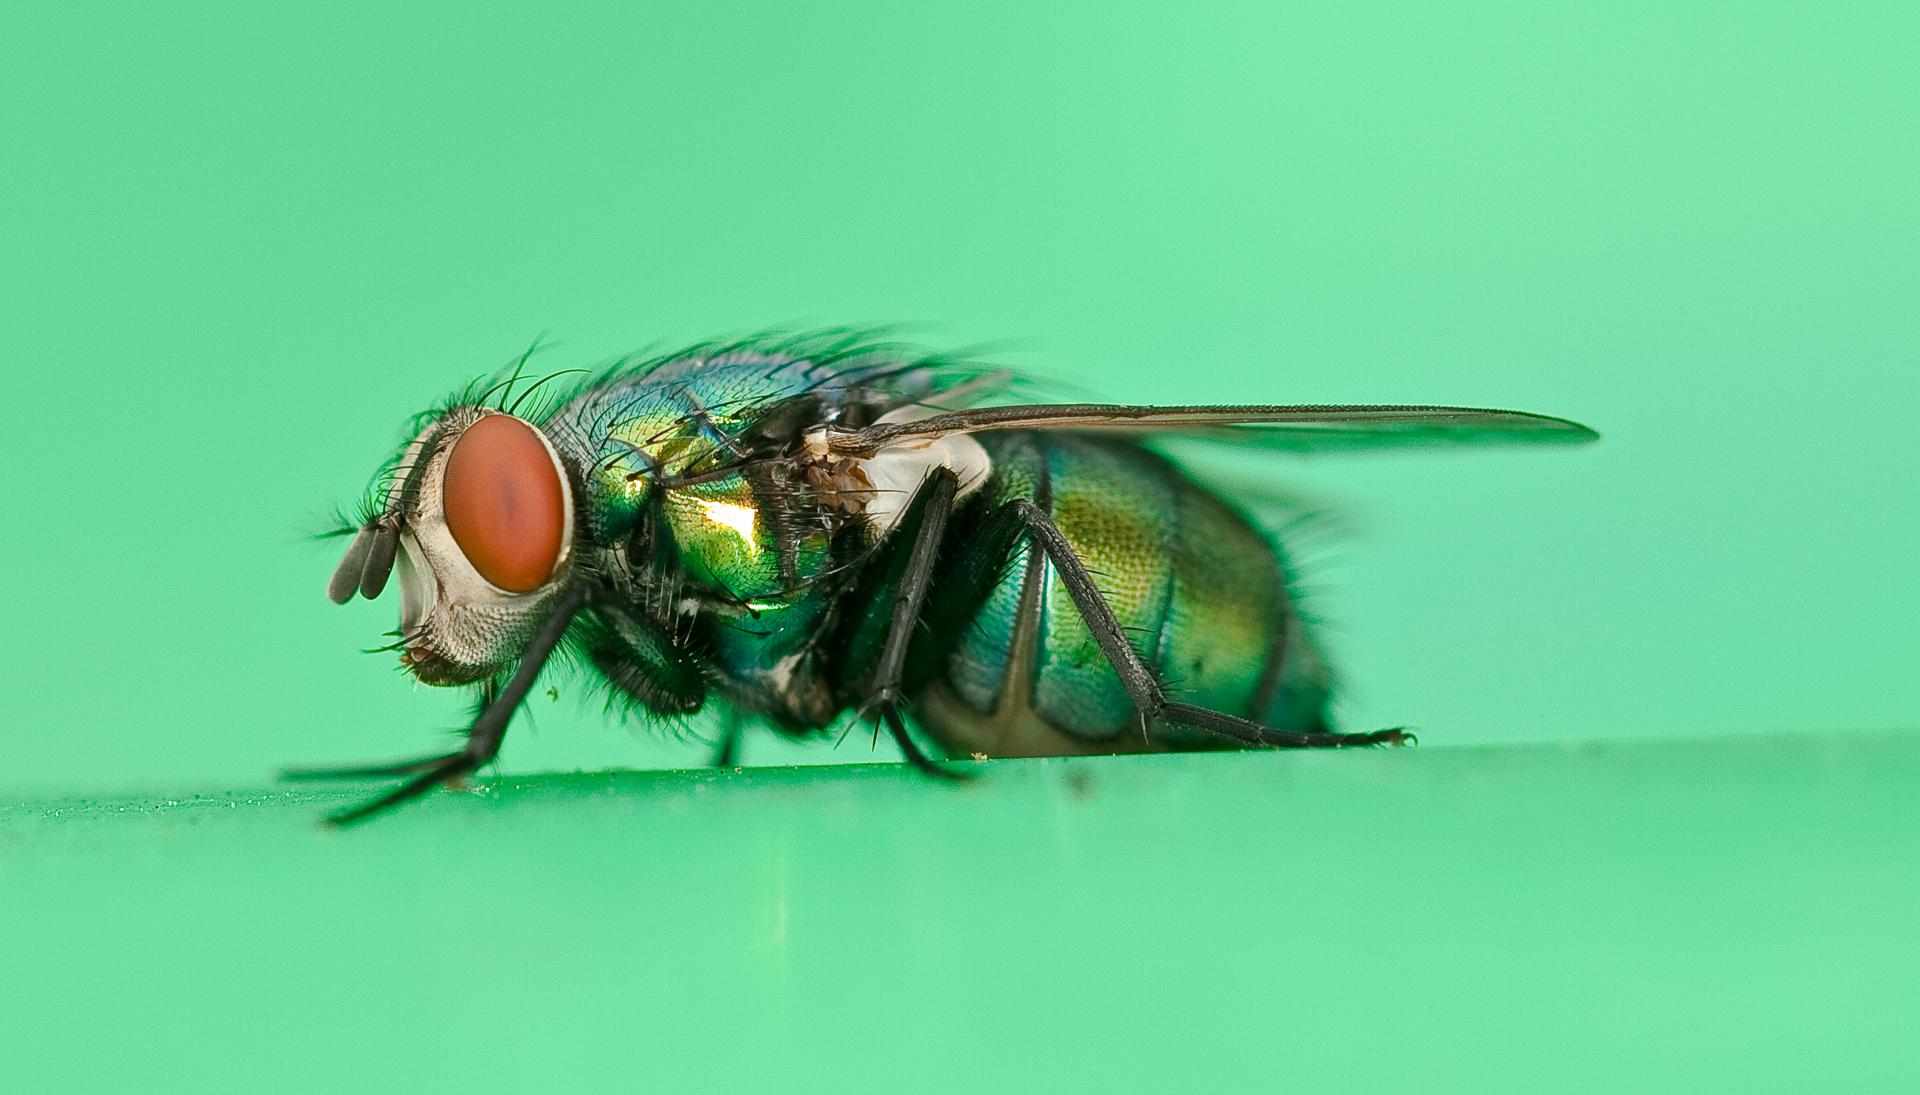 a close up po of a fly on green